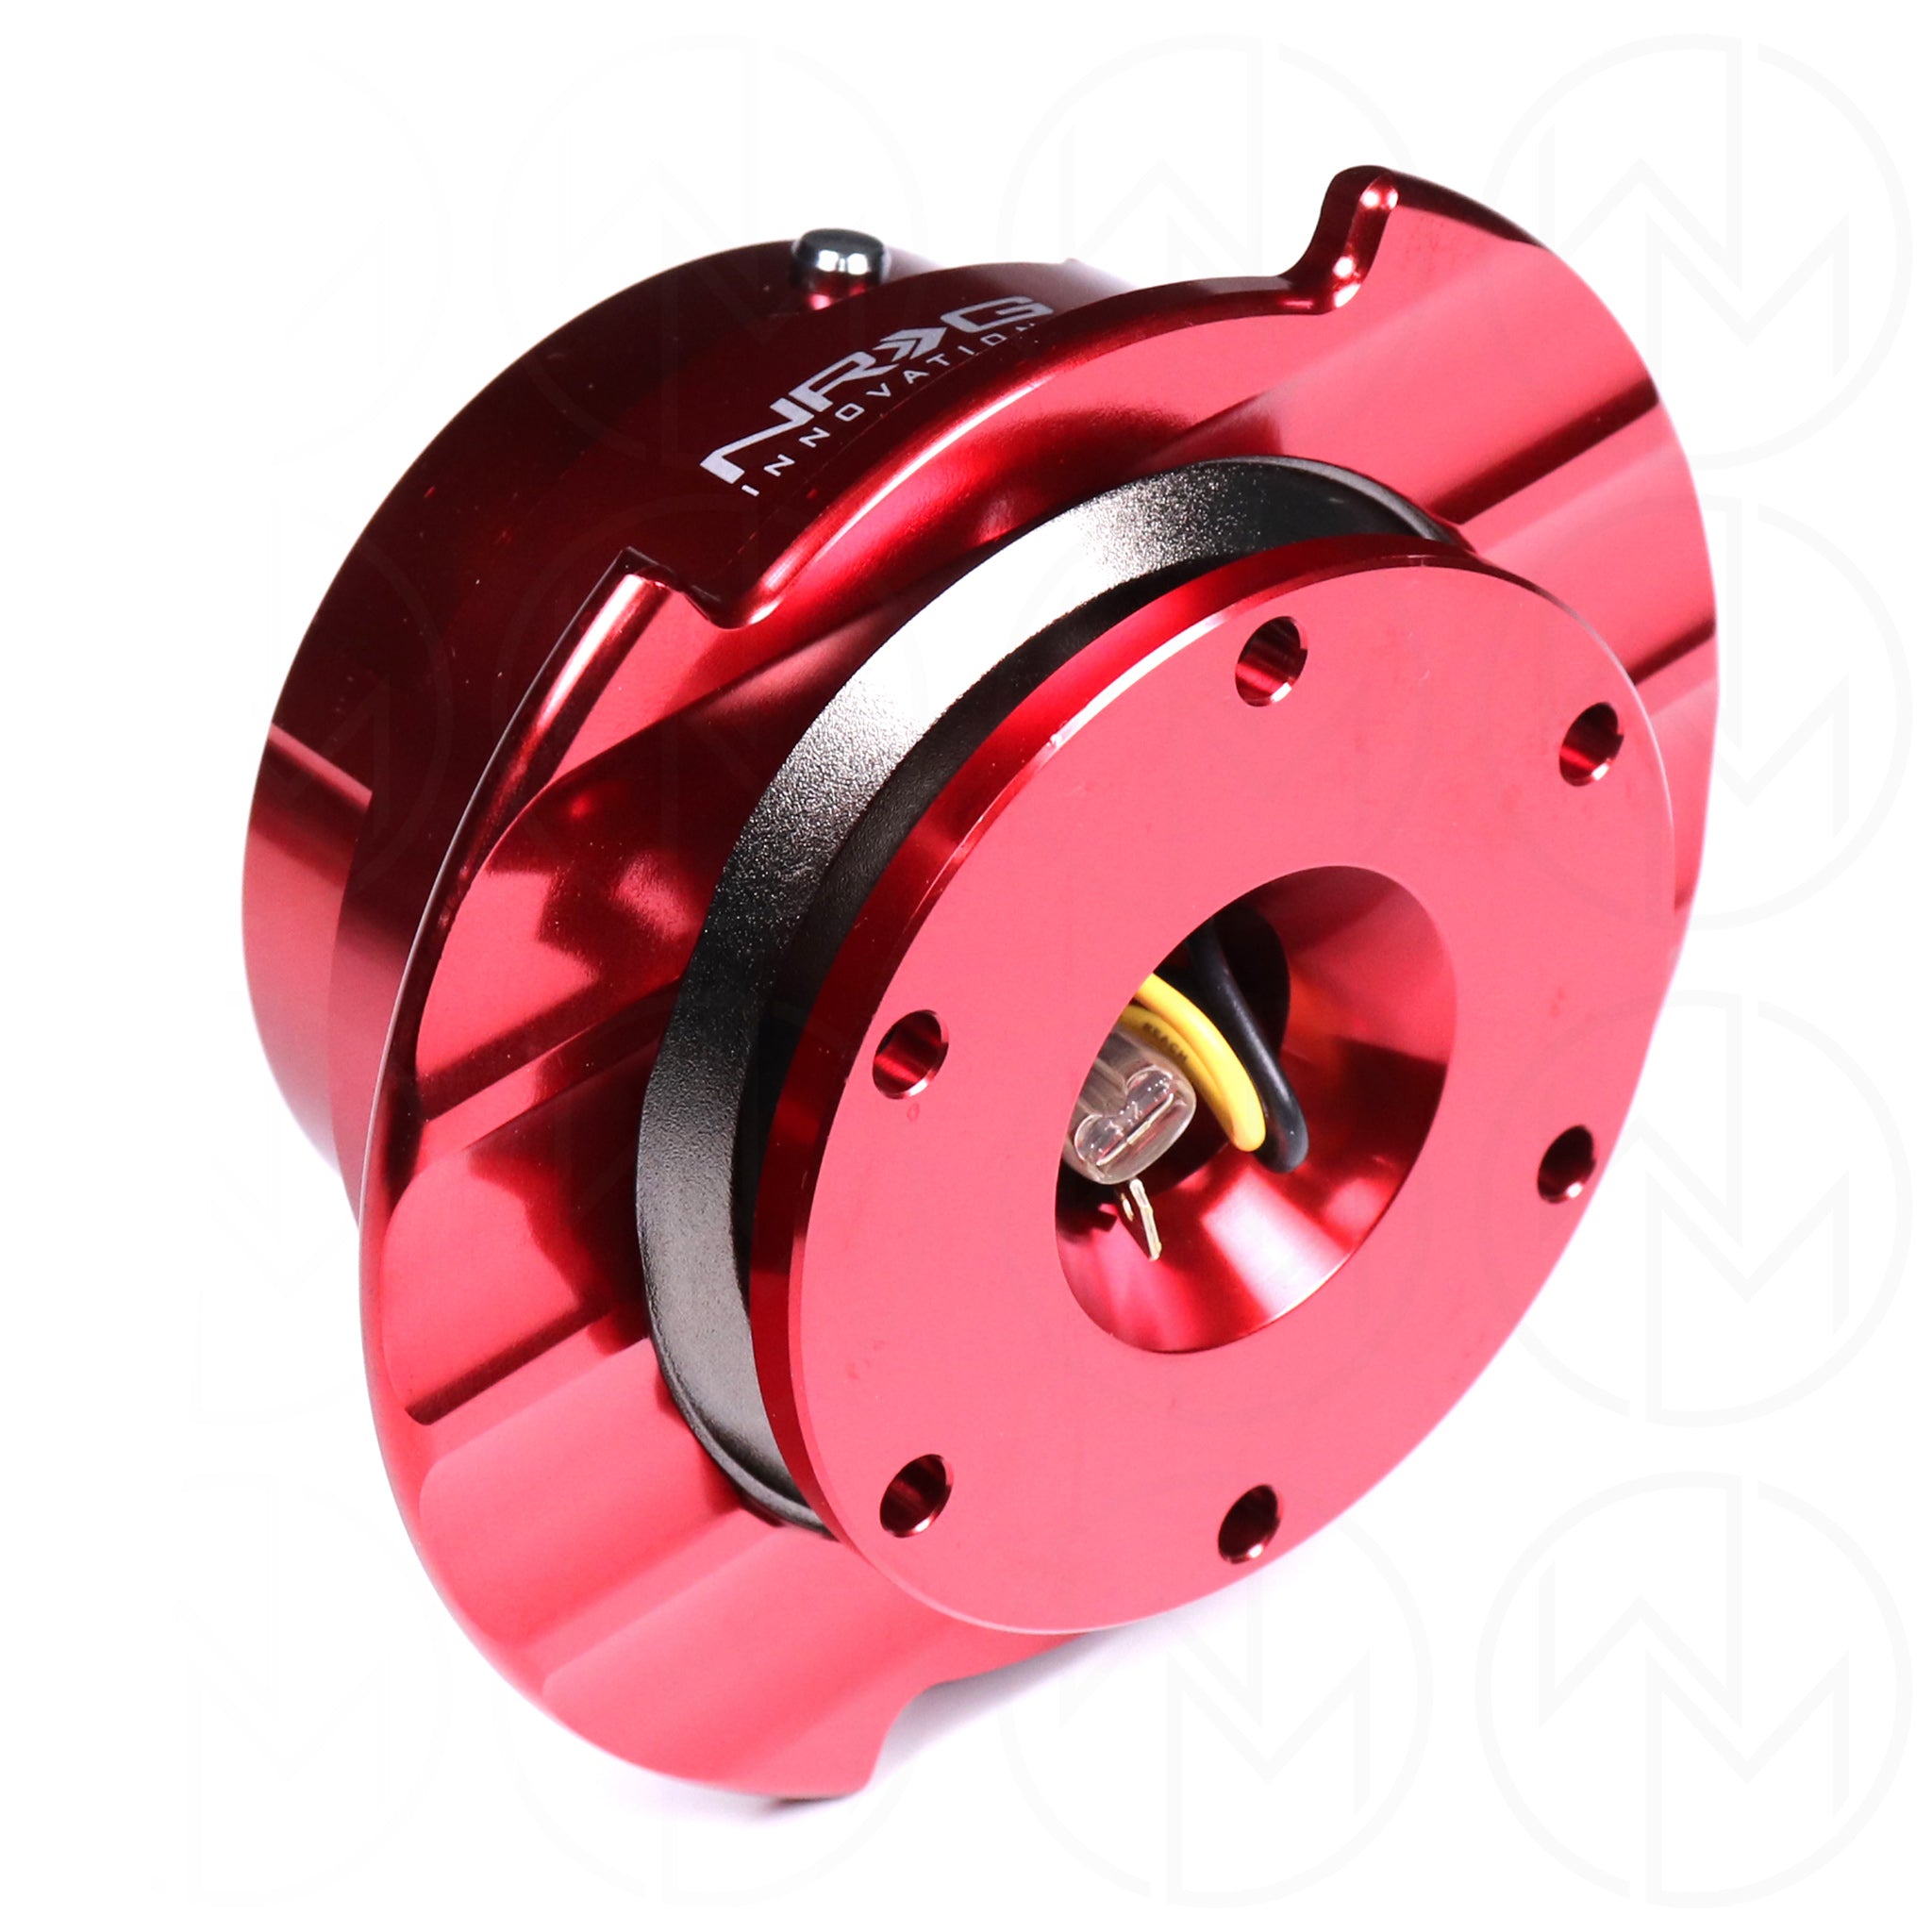 NRG Quick Release Hub Gen 2.5 - Red w/Red Ring